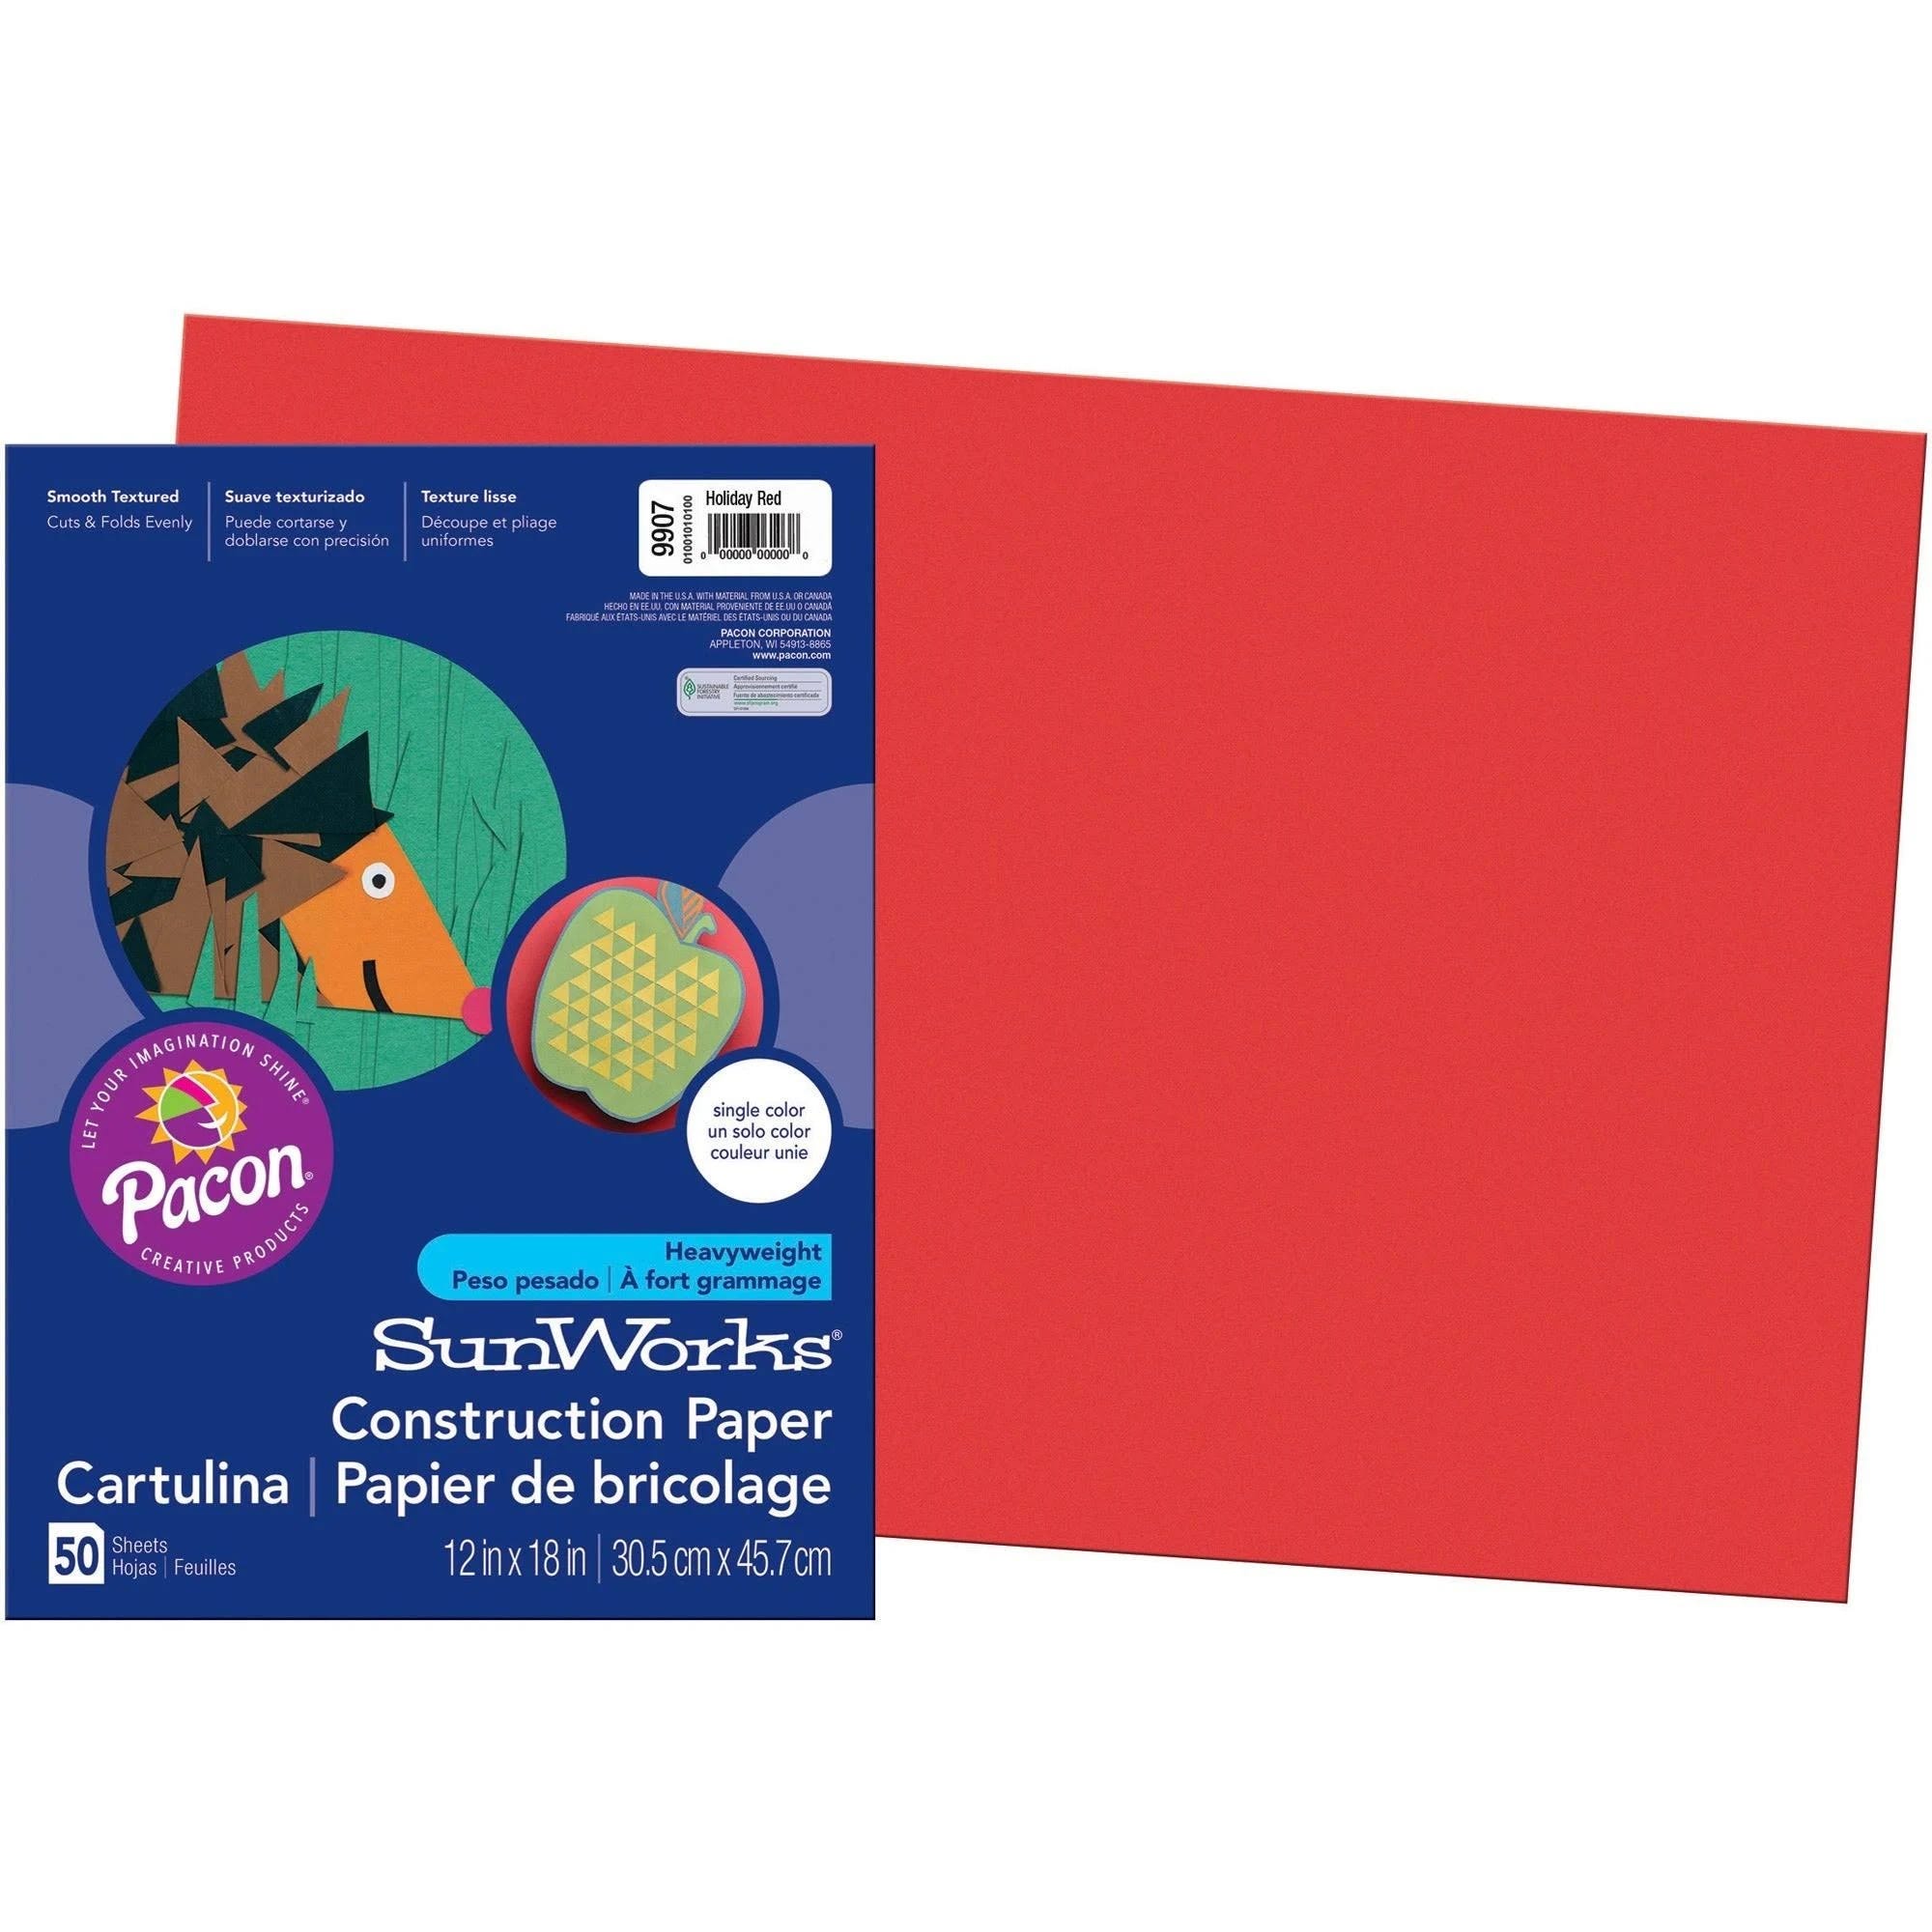 Bright Red Construction Paper for All Crafts and Projects - 12